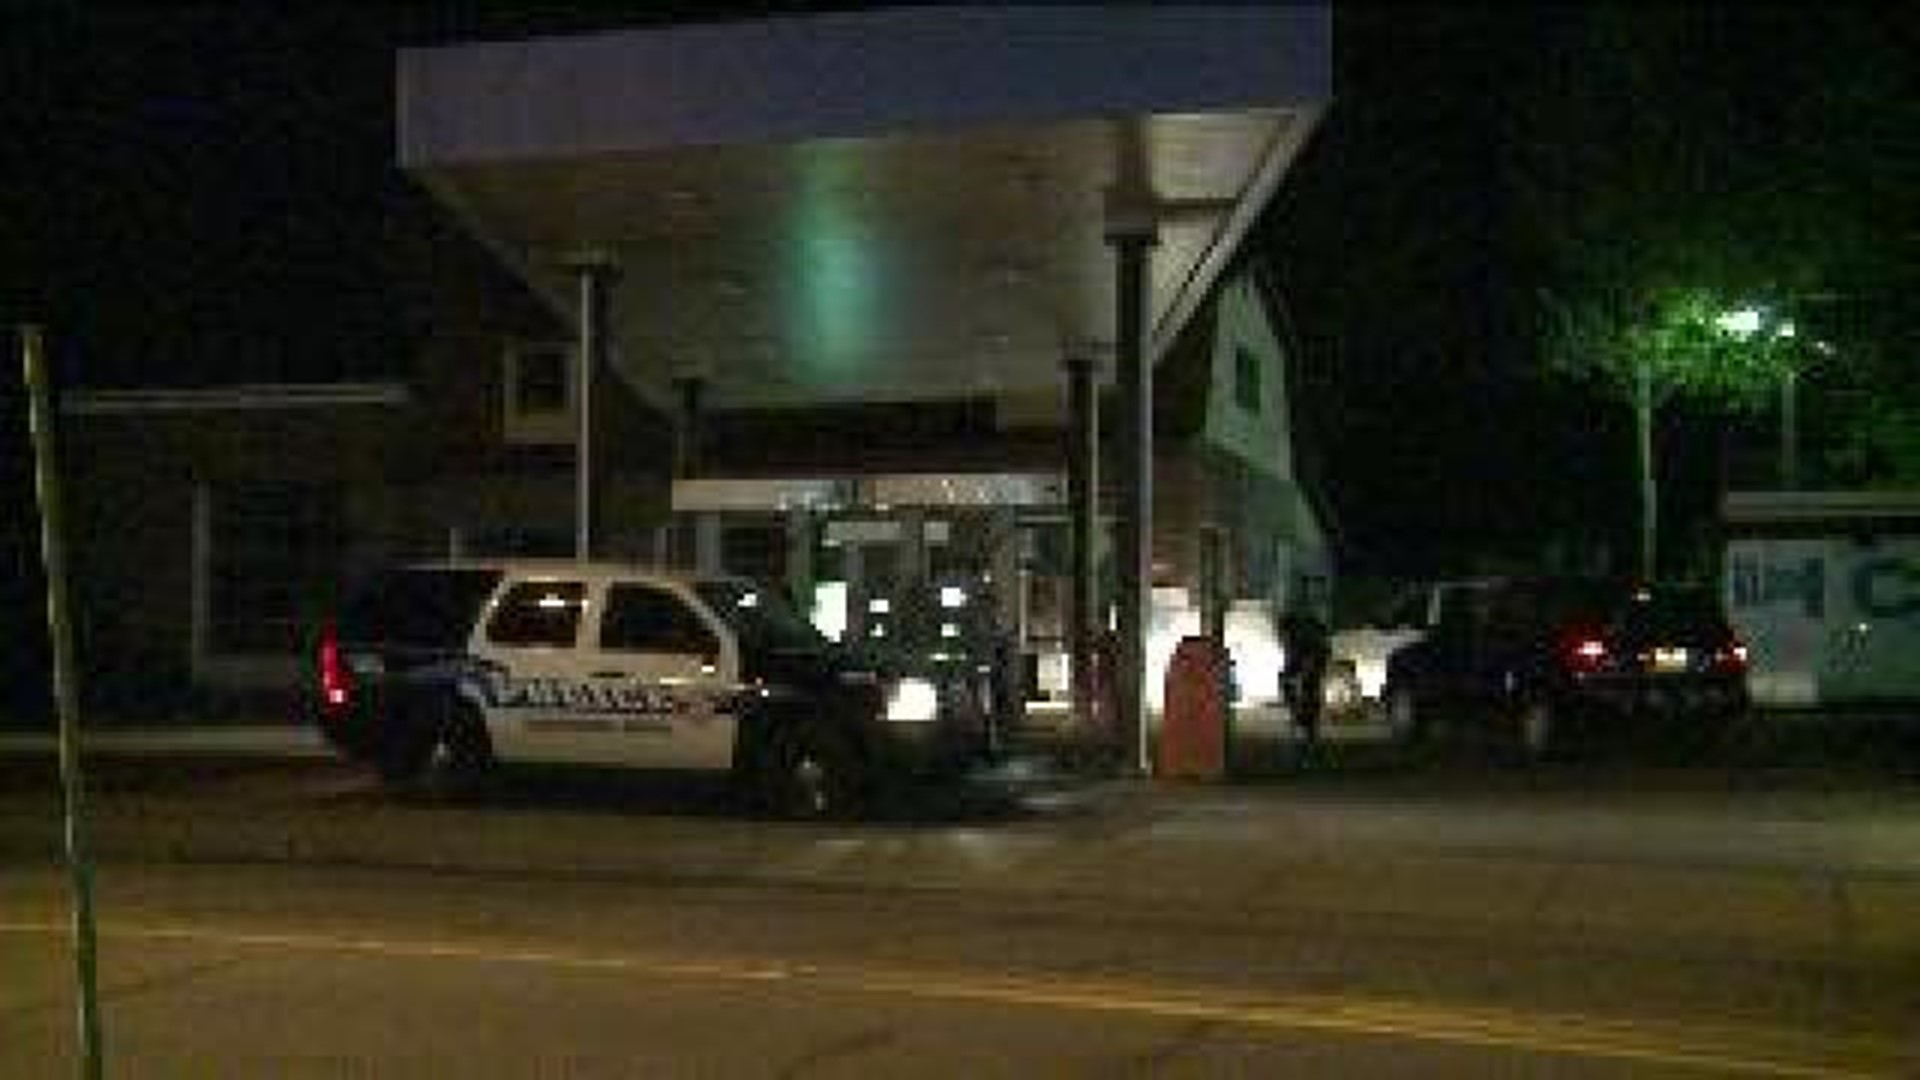 Gas Station Worker Robbed at Gunpoint